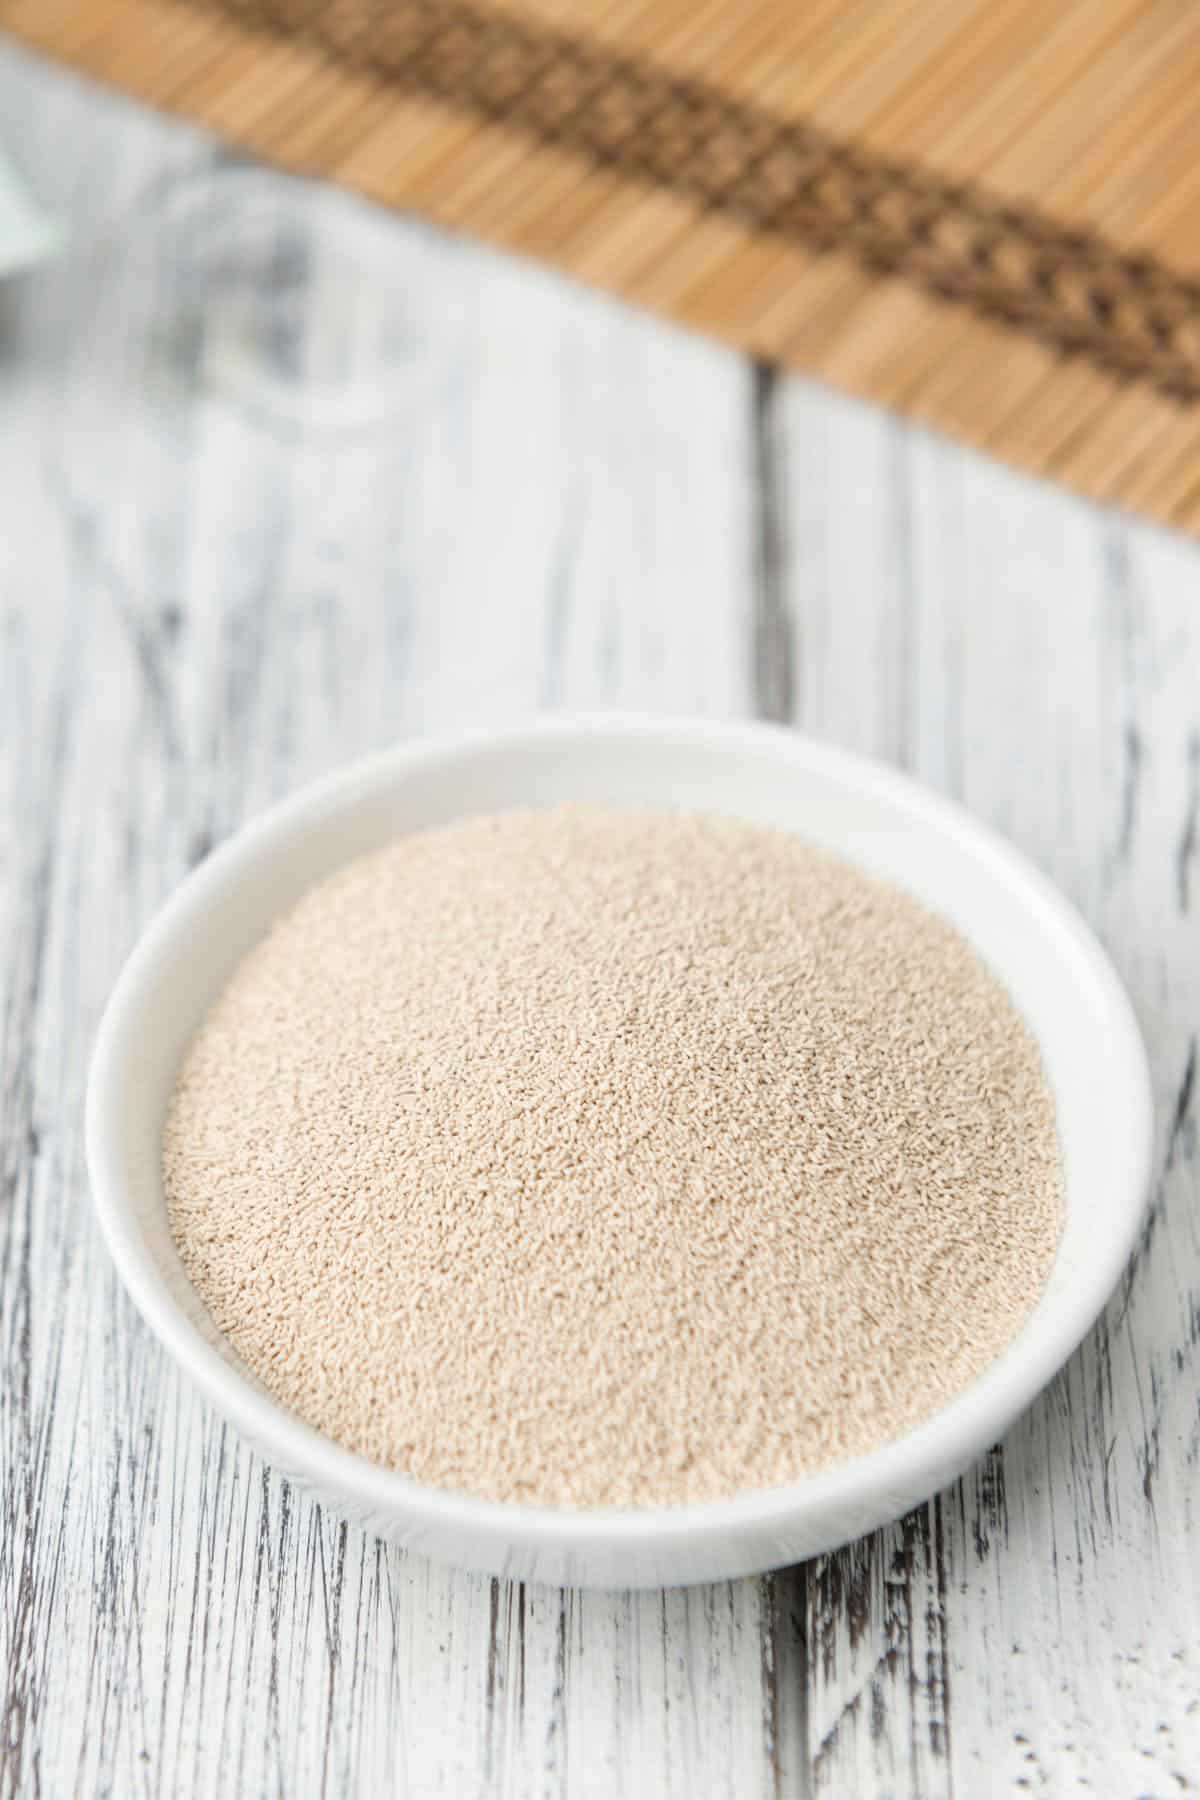 Dry yeast in a small bowl.